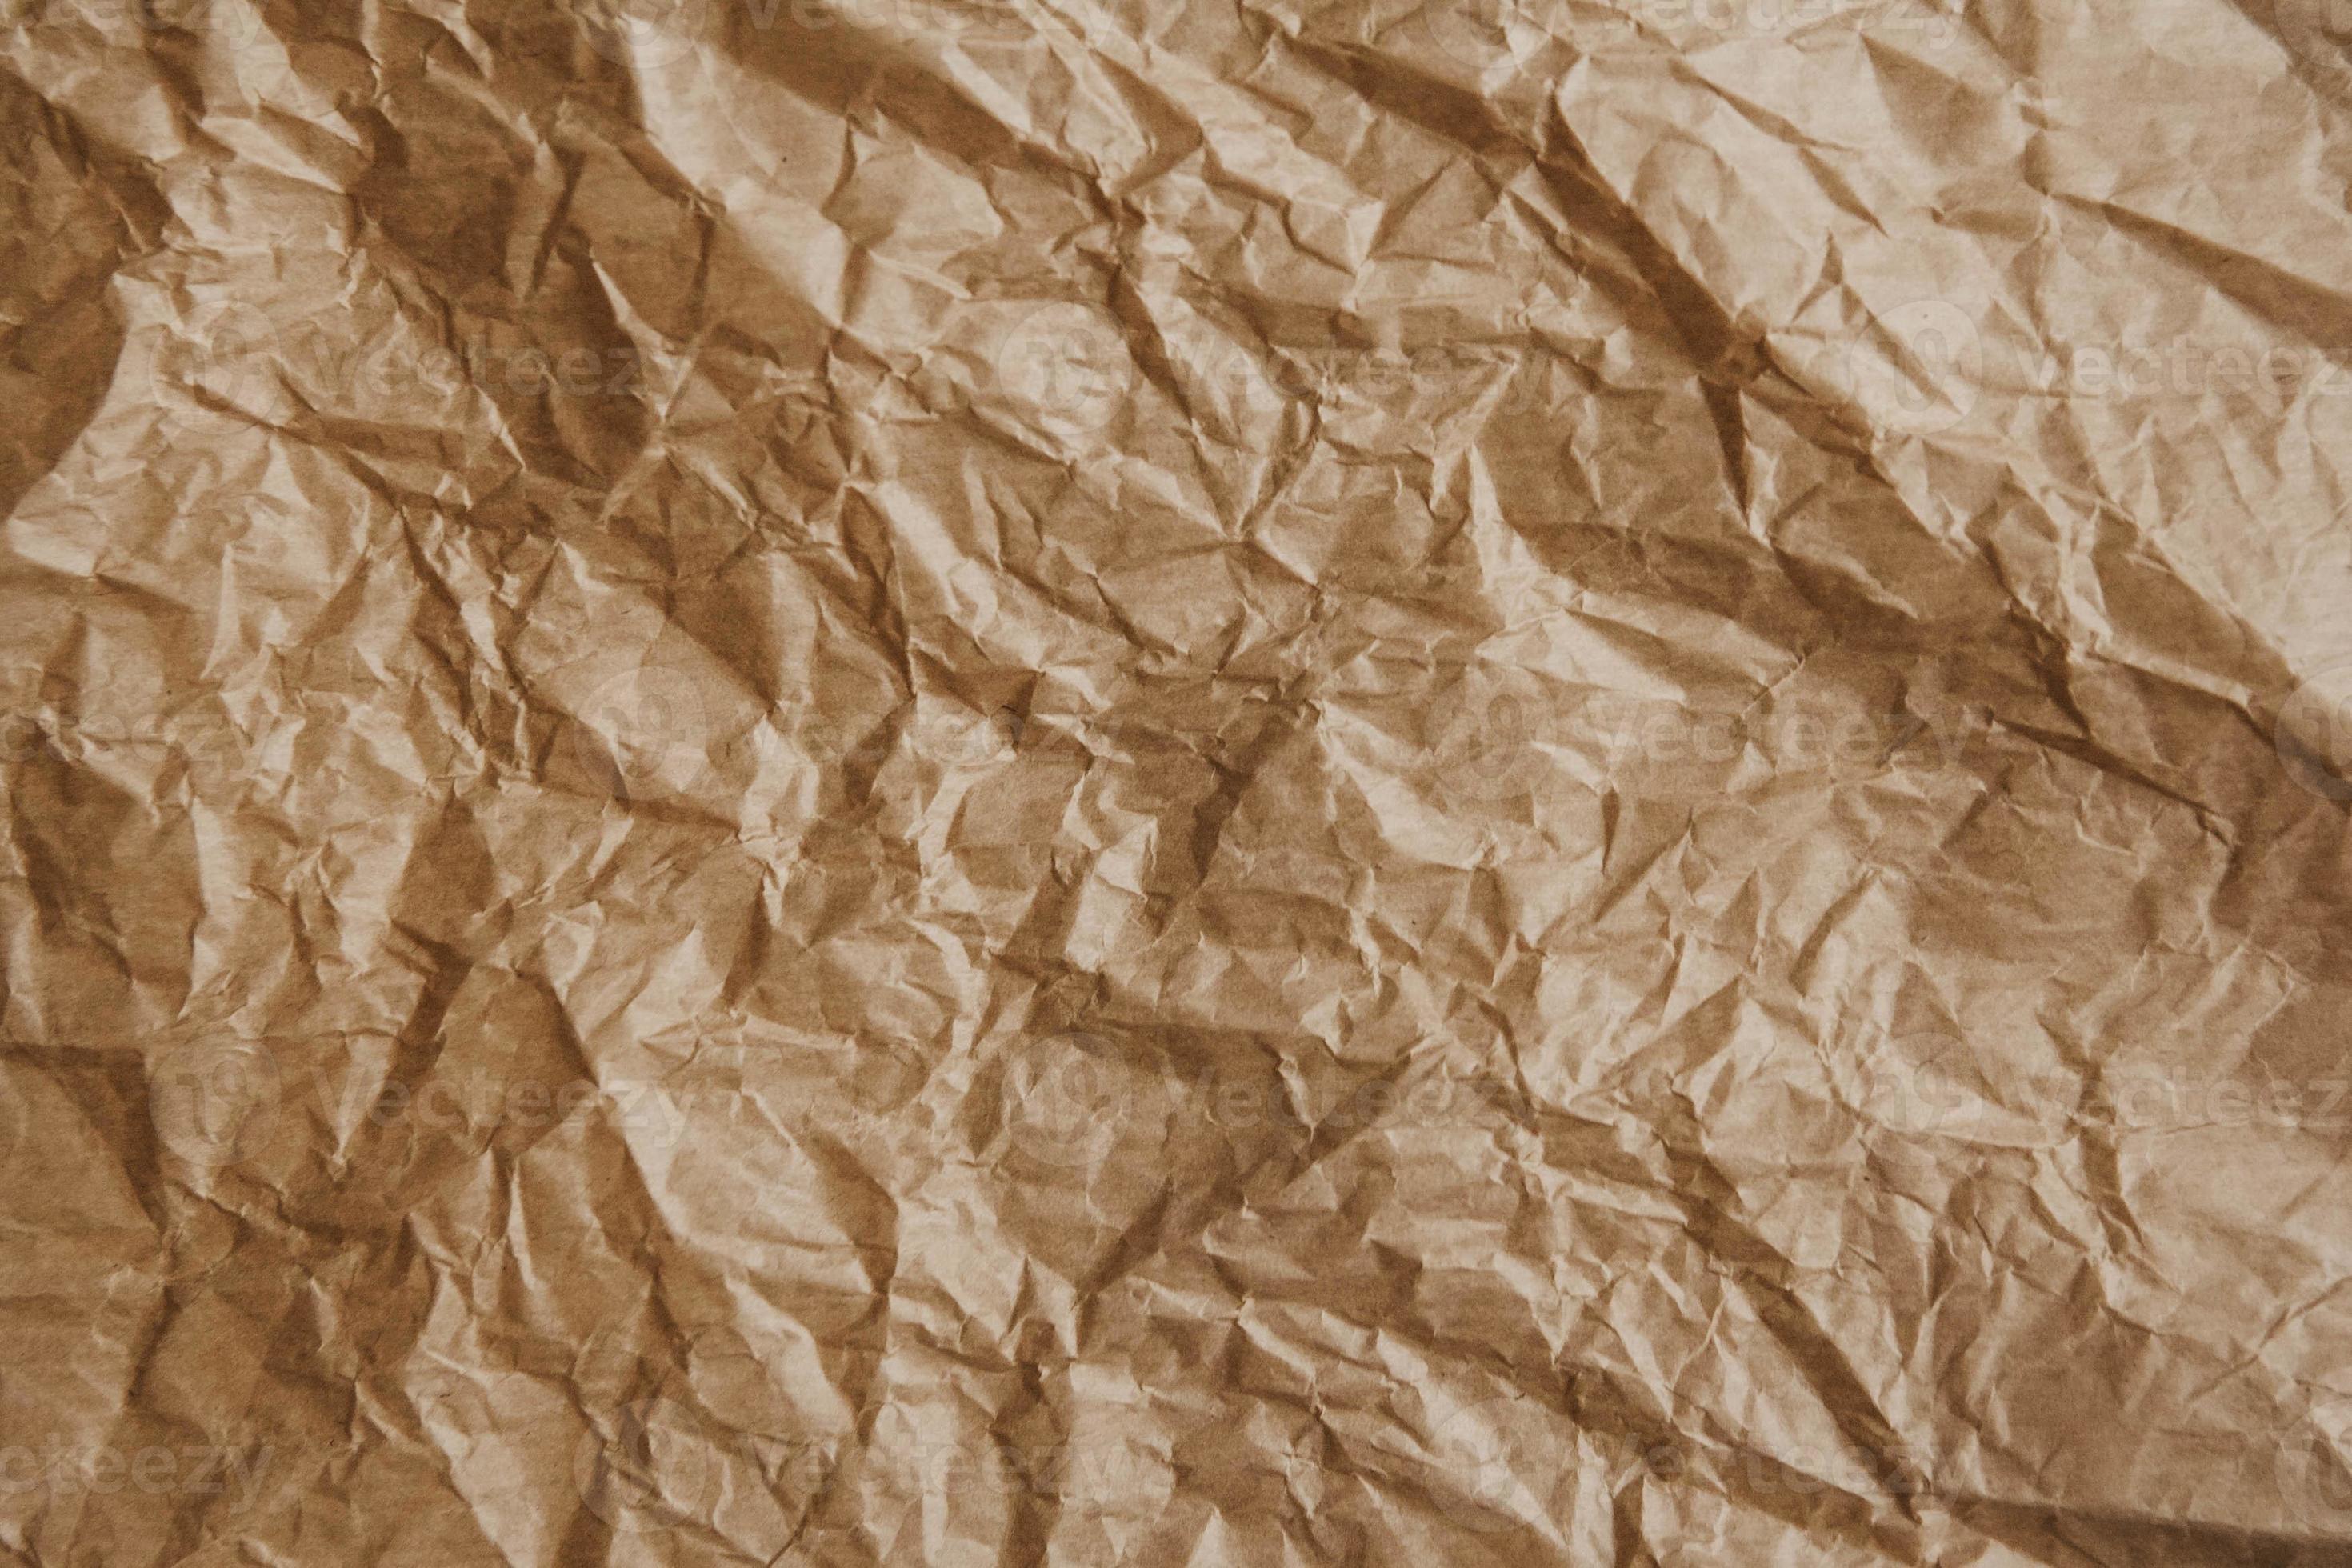 https://static.vecteezy.com/system/resources/previews/004/718/032/large_2x/wrinkled-kraft-brown-paper-as-a-background-image-photo.jpg